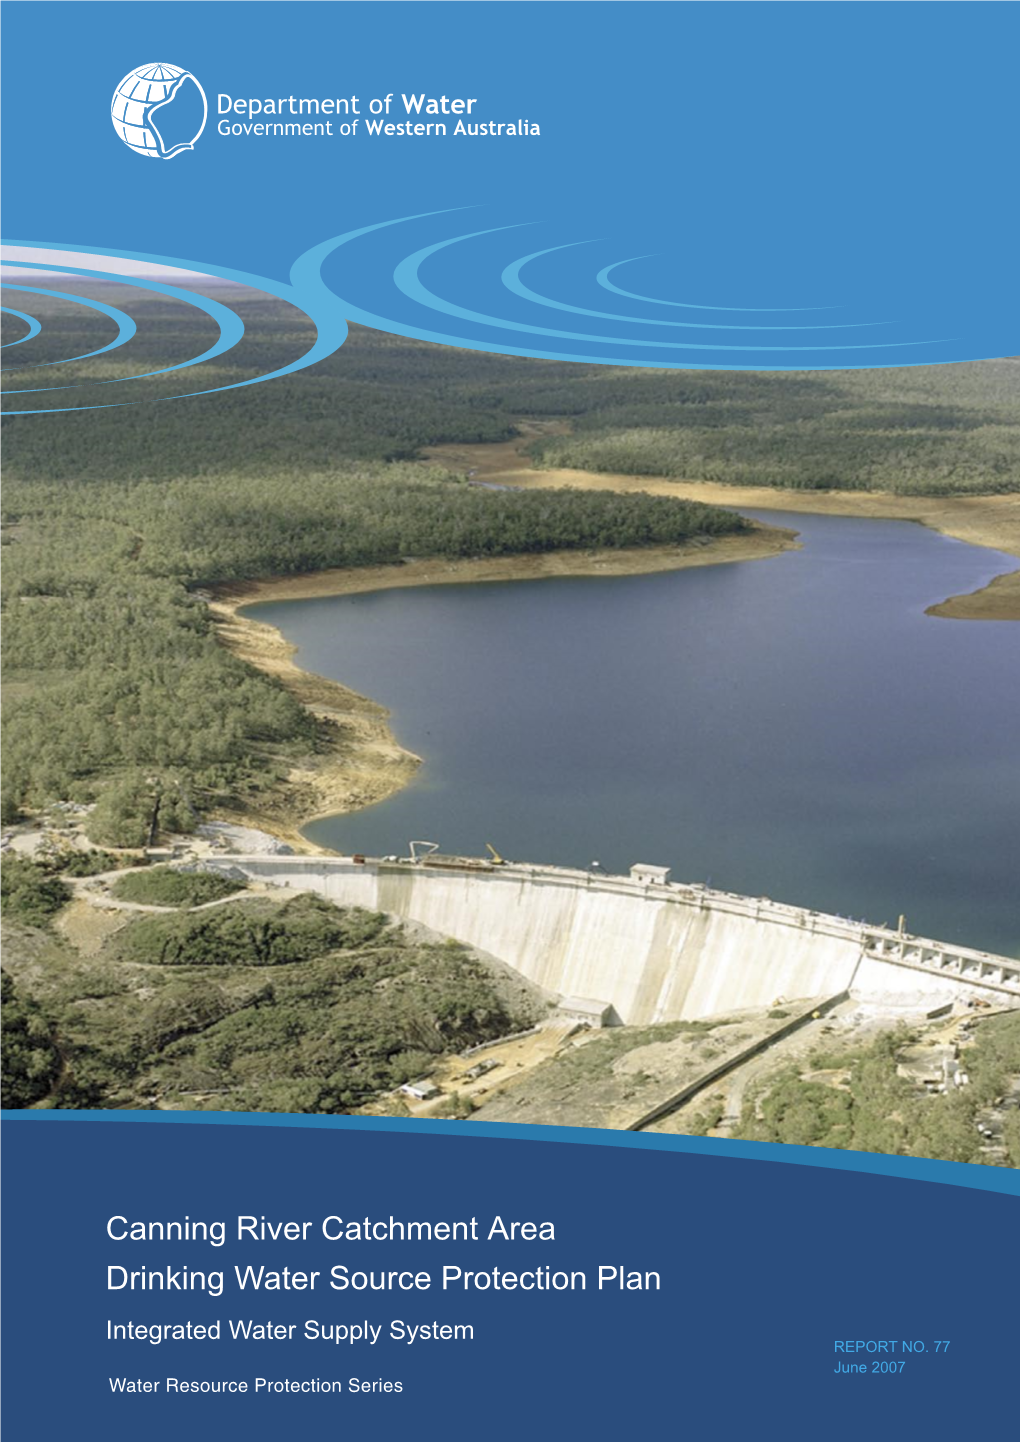 Canning River Catchment Area Drinking Water Source Protection Plan Perth Integrated Water Supply Scheme